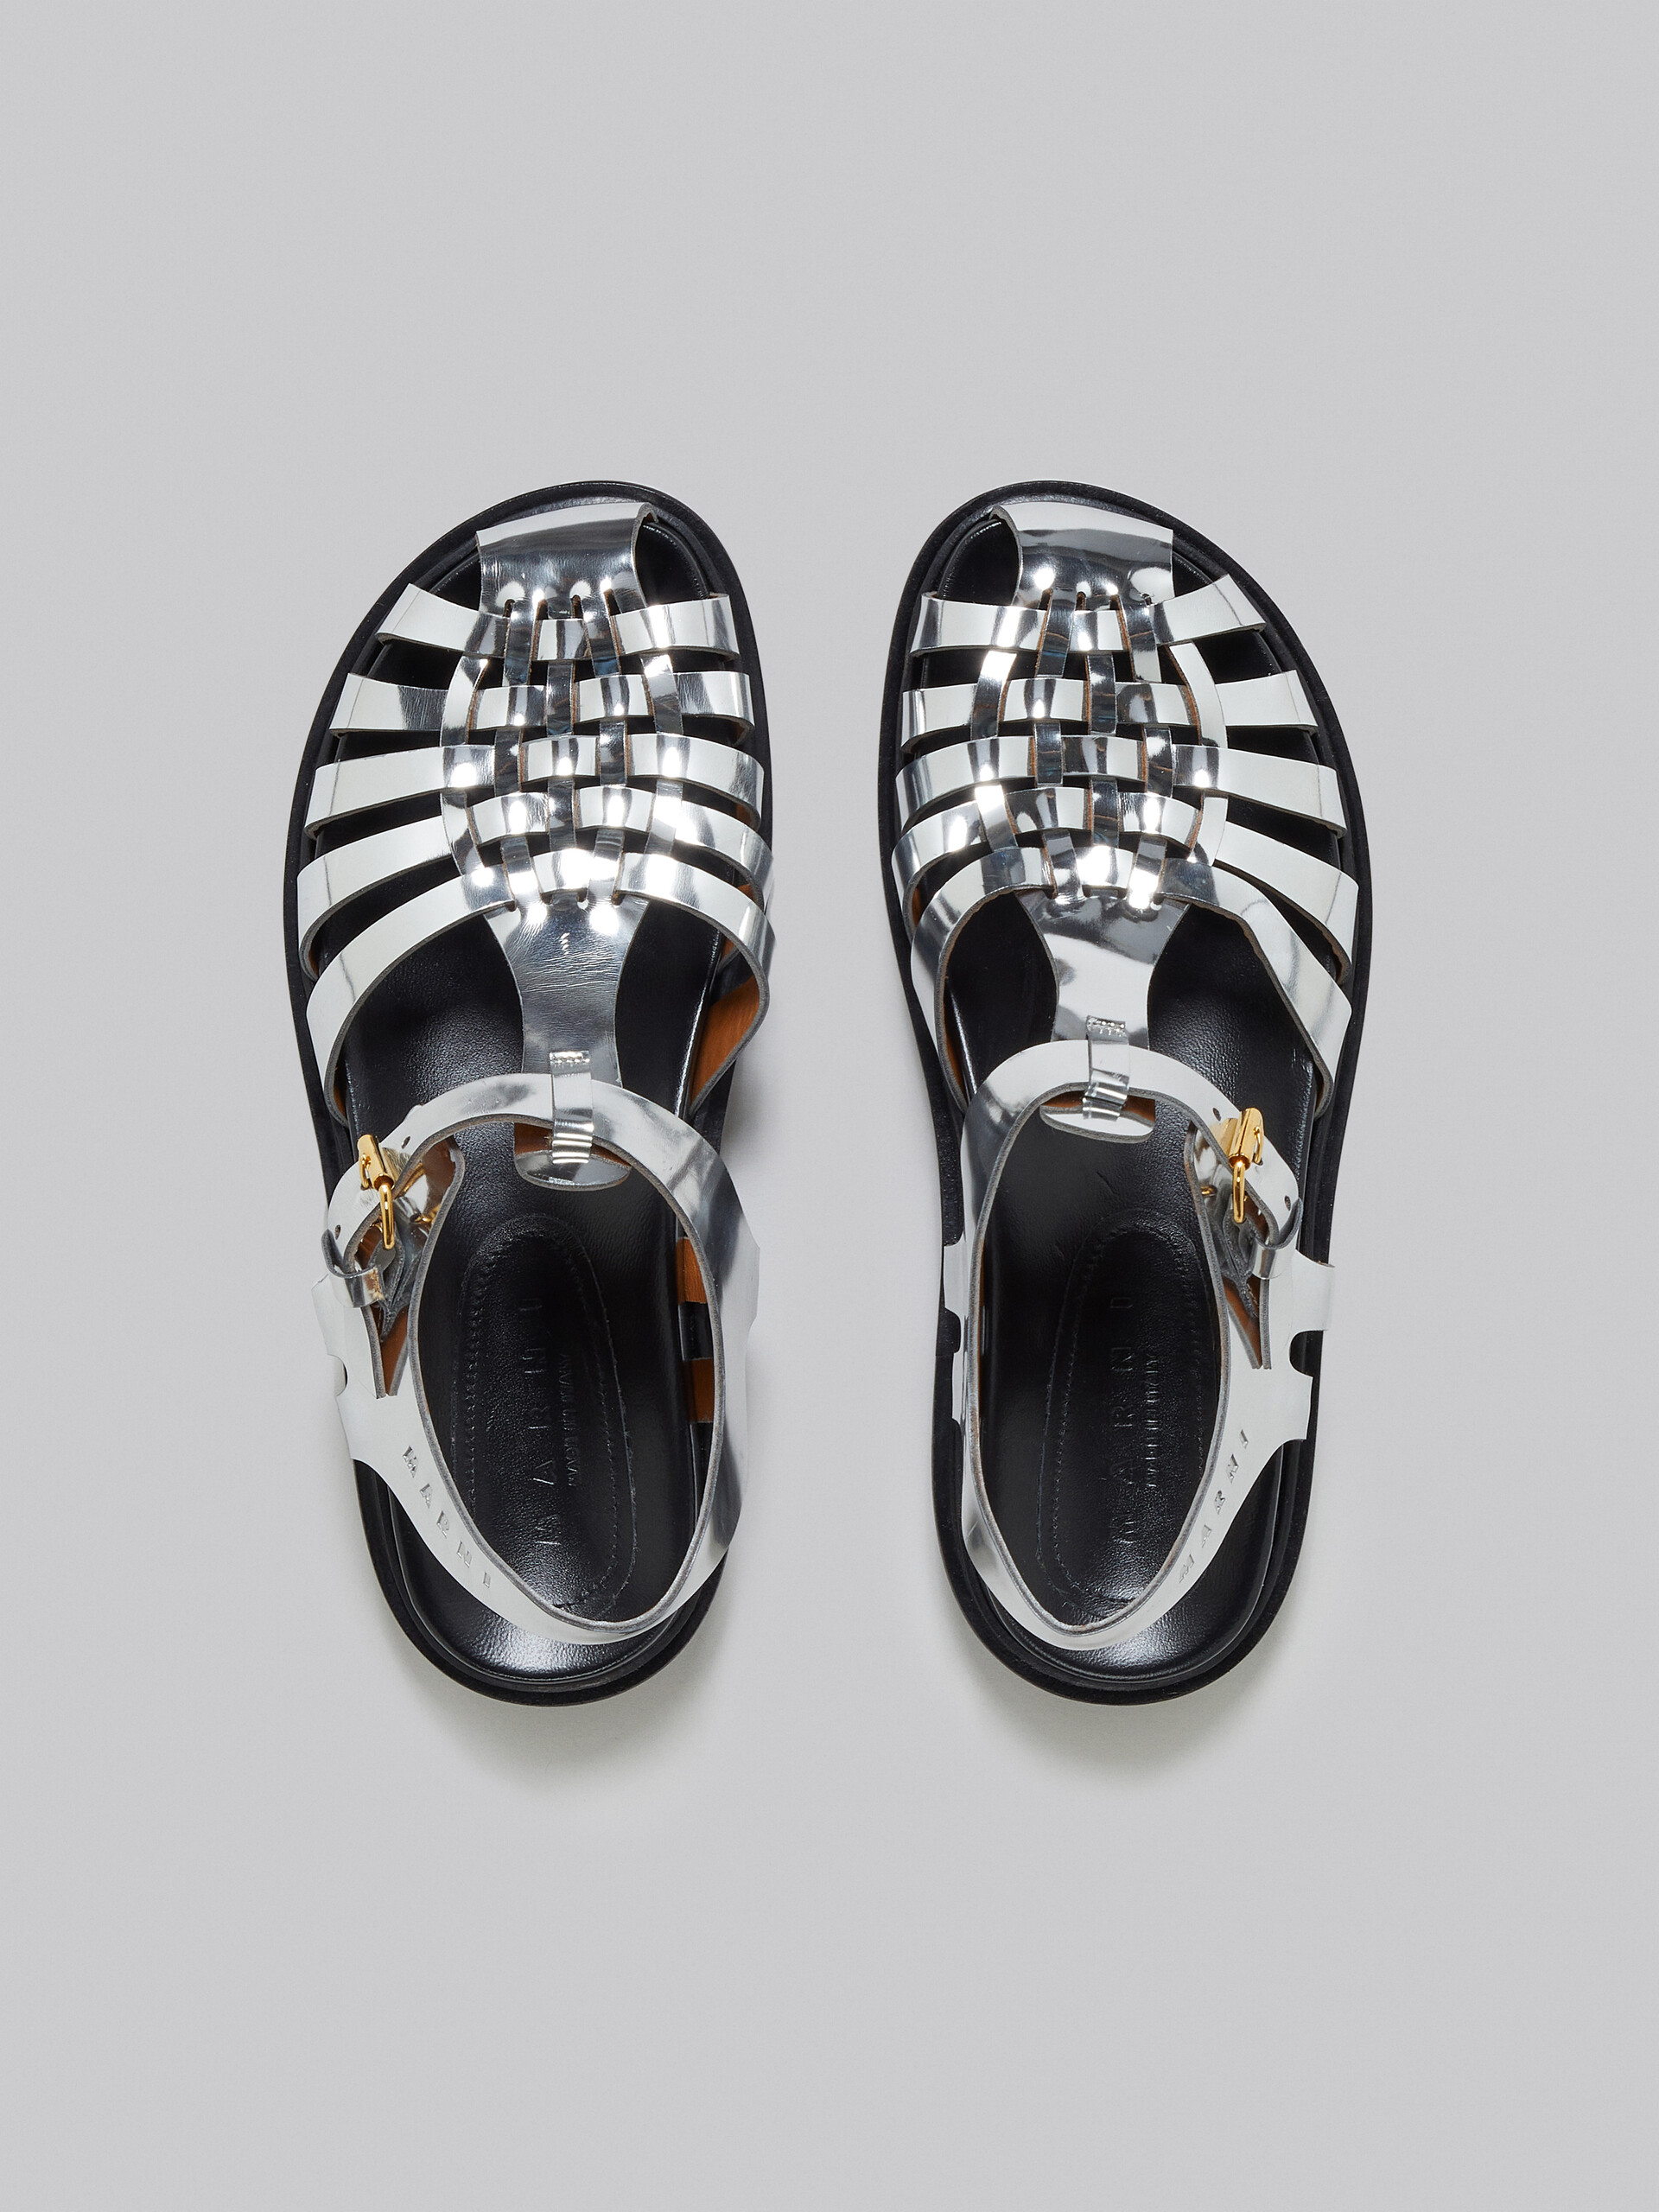 Silver mirrored leather fisherman's sandal - Sandals - Image 4